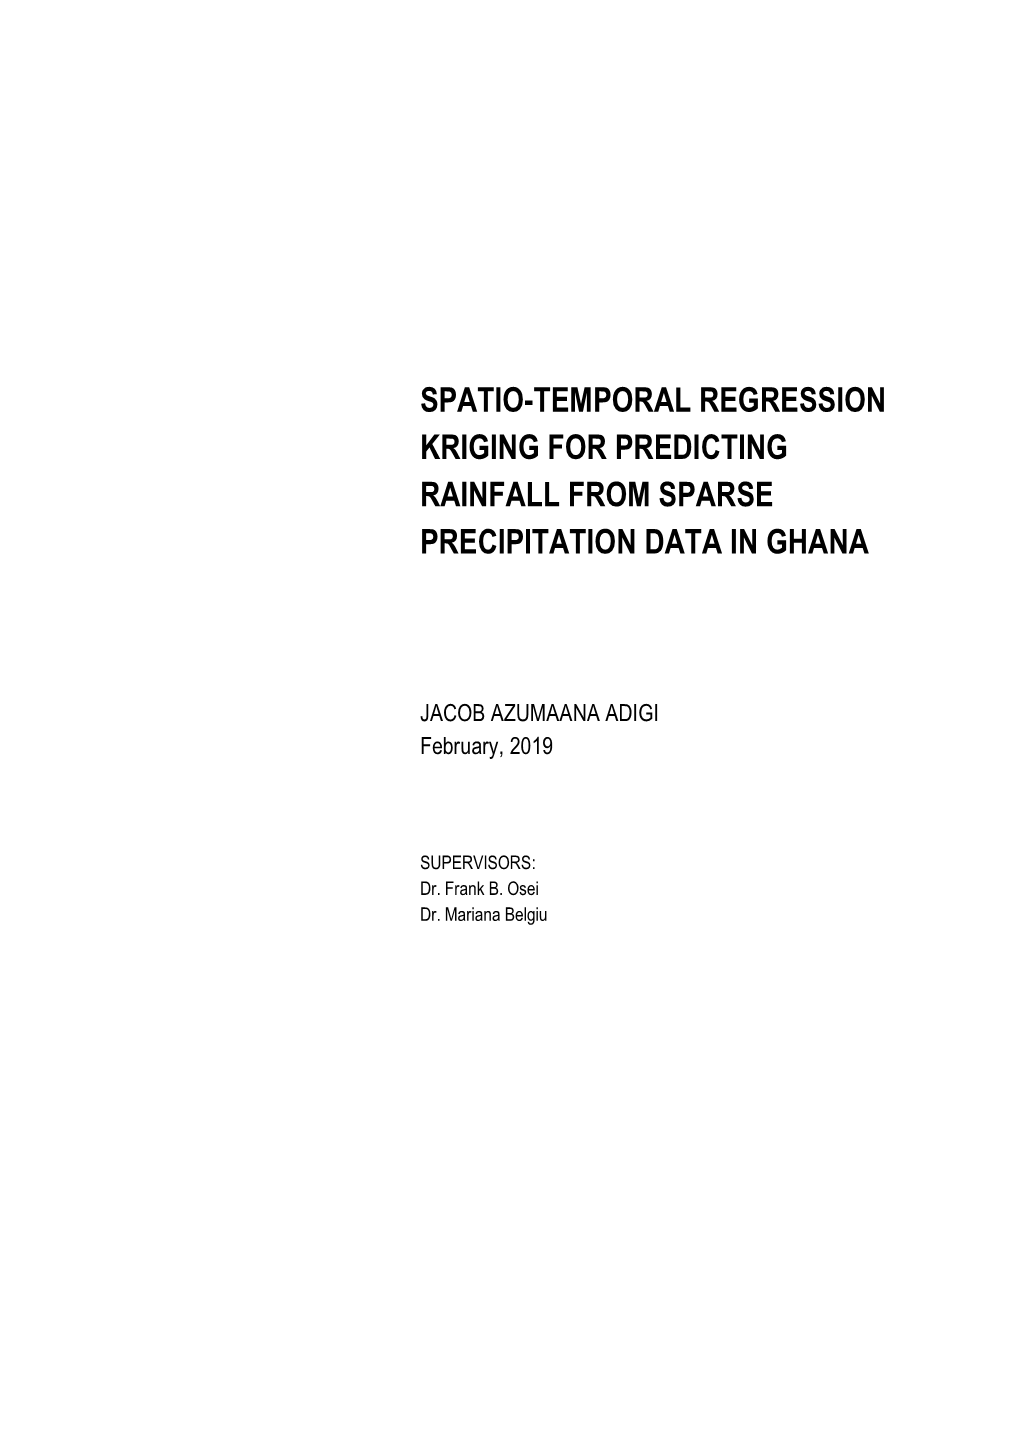 Spatio-Temporal Regression Kriging for Predicting Rainfall from Sparse Precipitation Data in Ghana